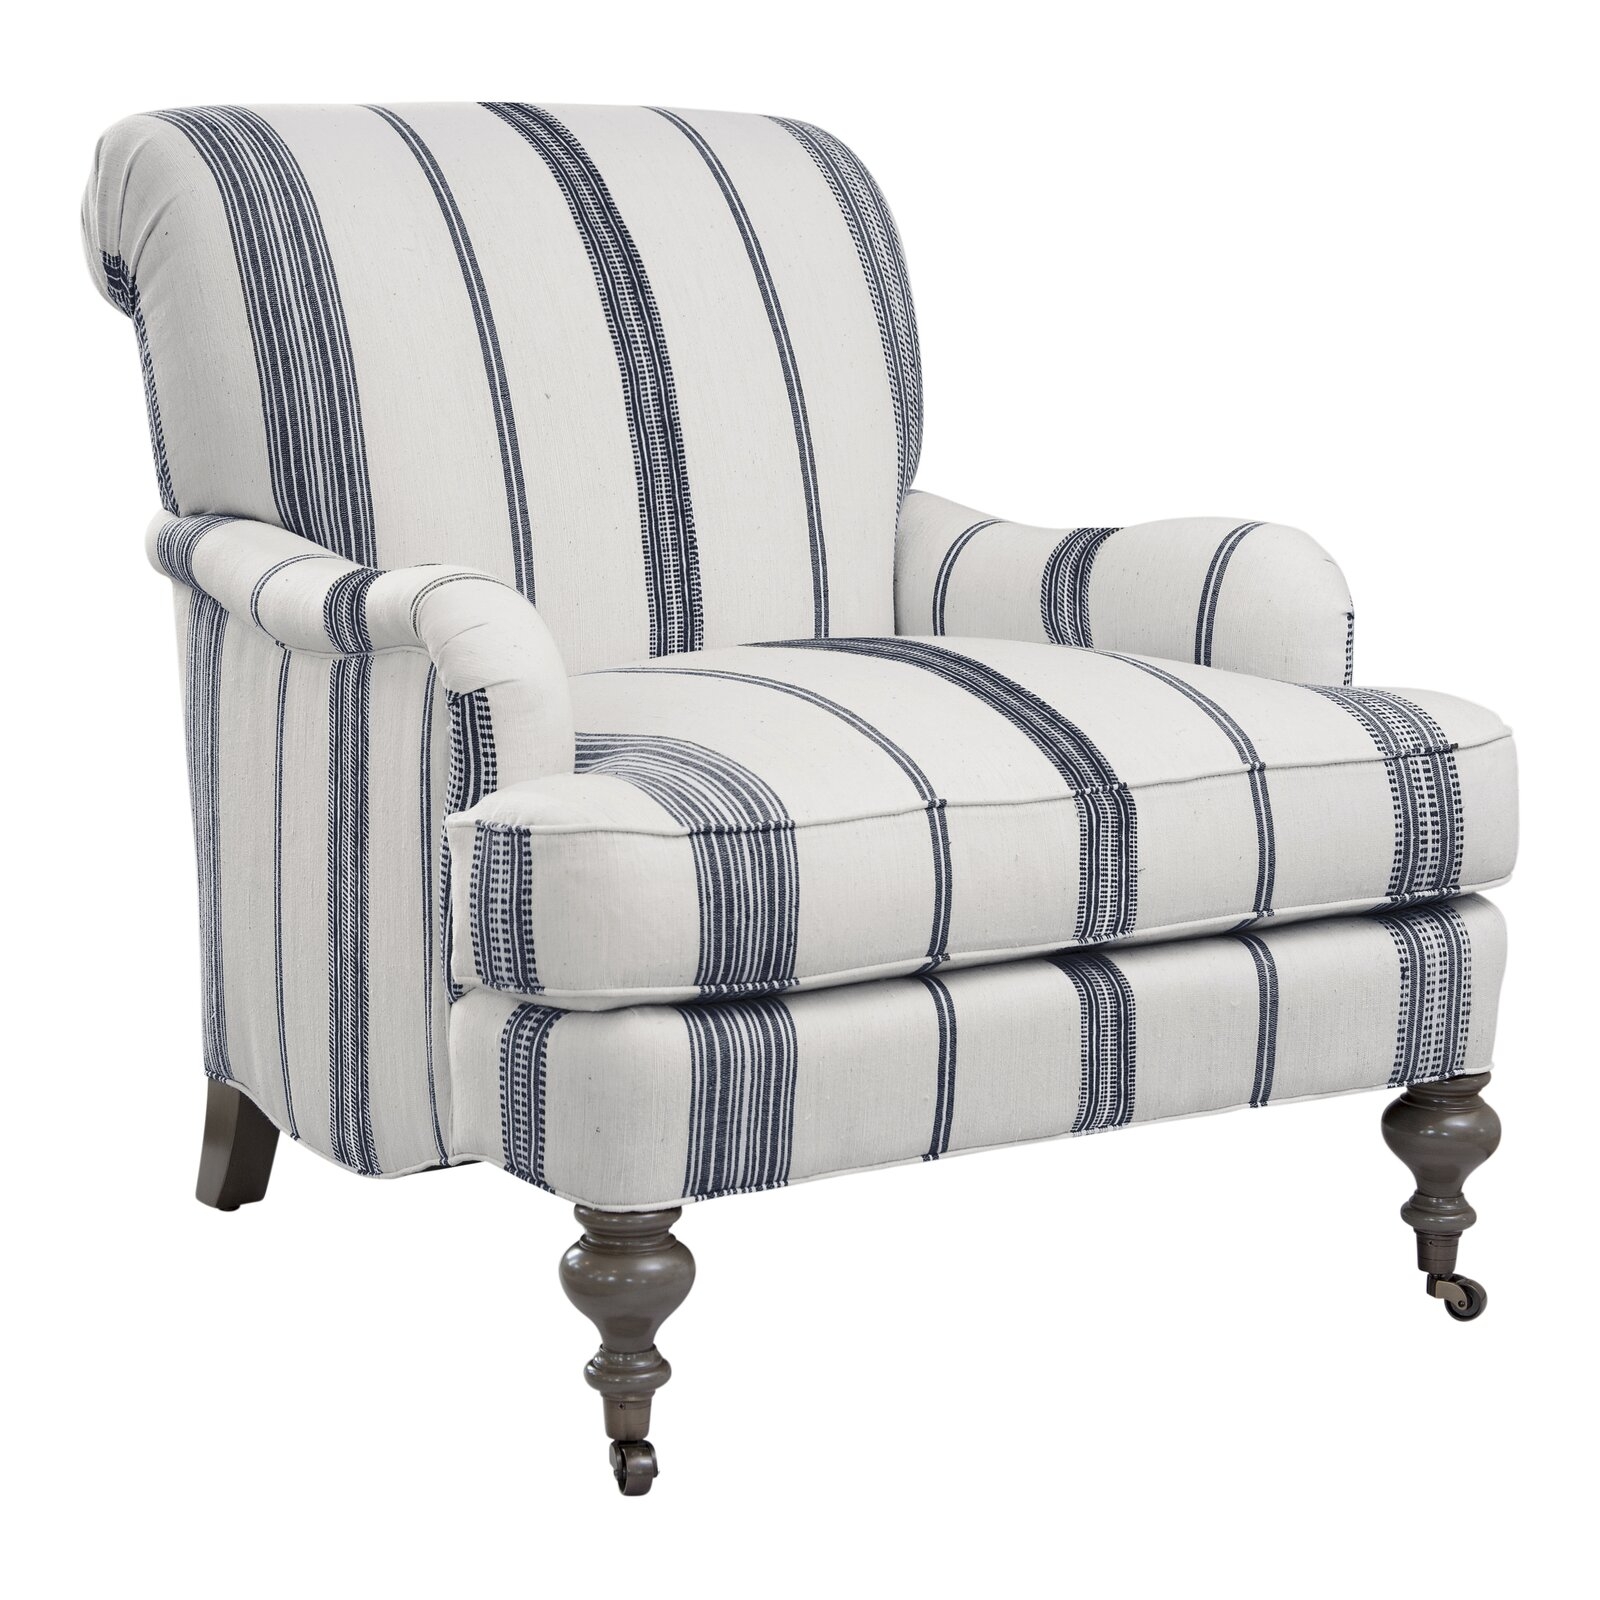 Imagine Home Chatsworth 33" W Cotton Armchair Fabric: Natural/Navy Stripe - Image 0